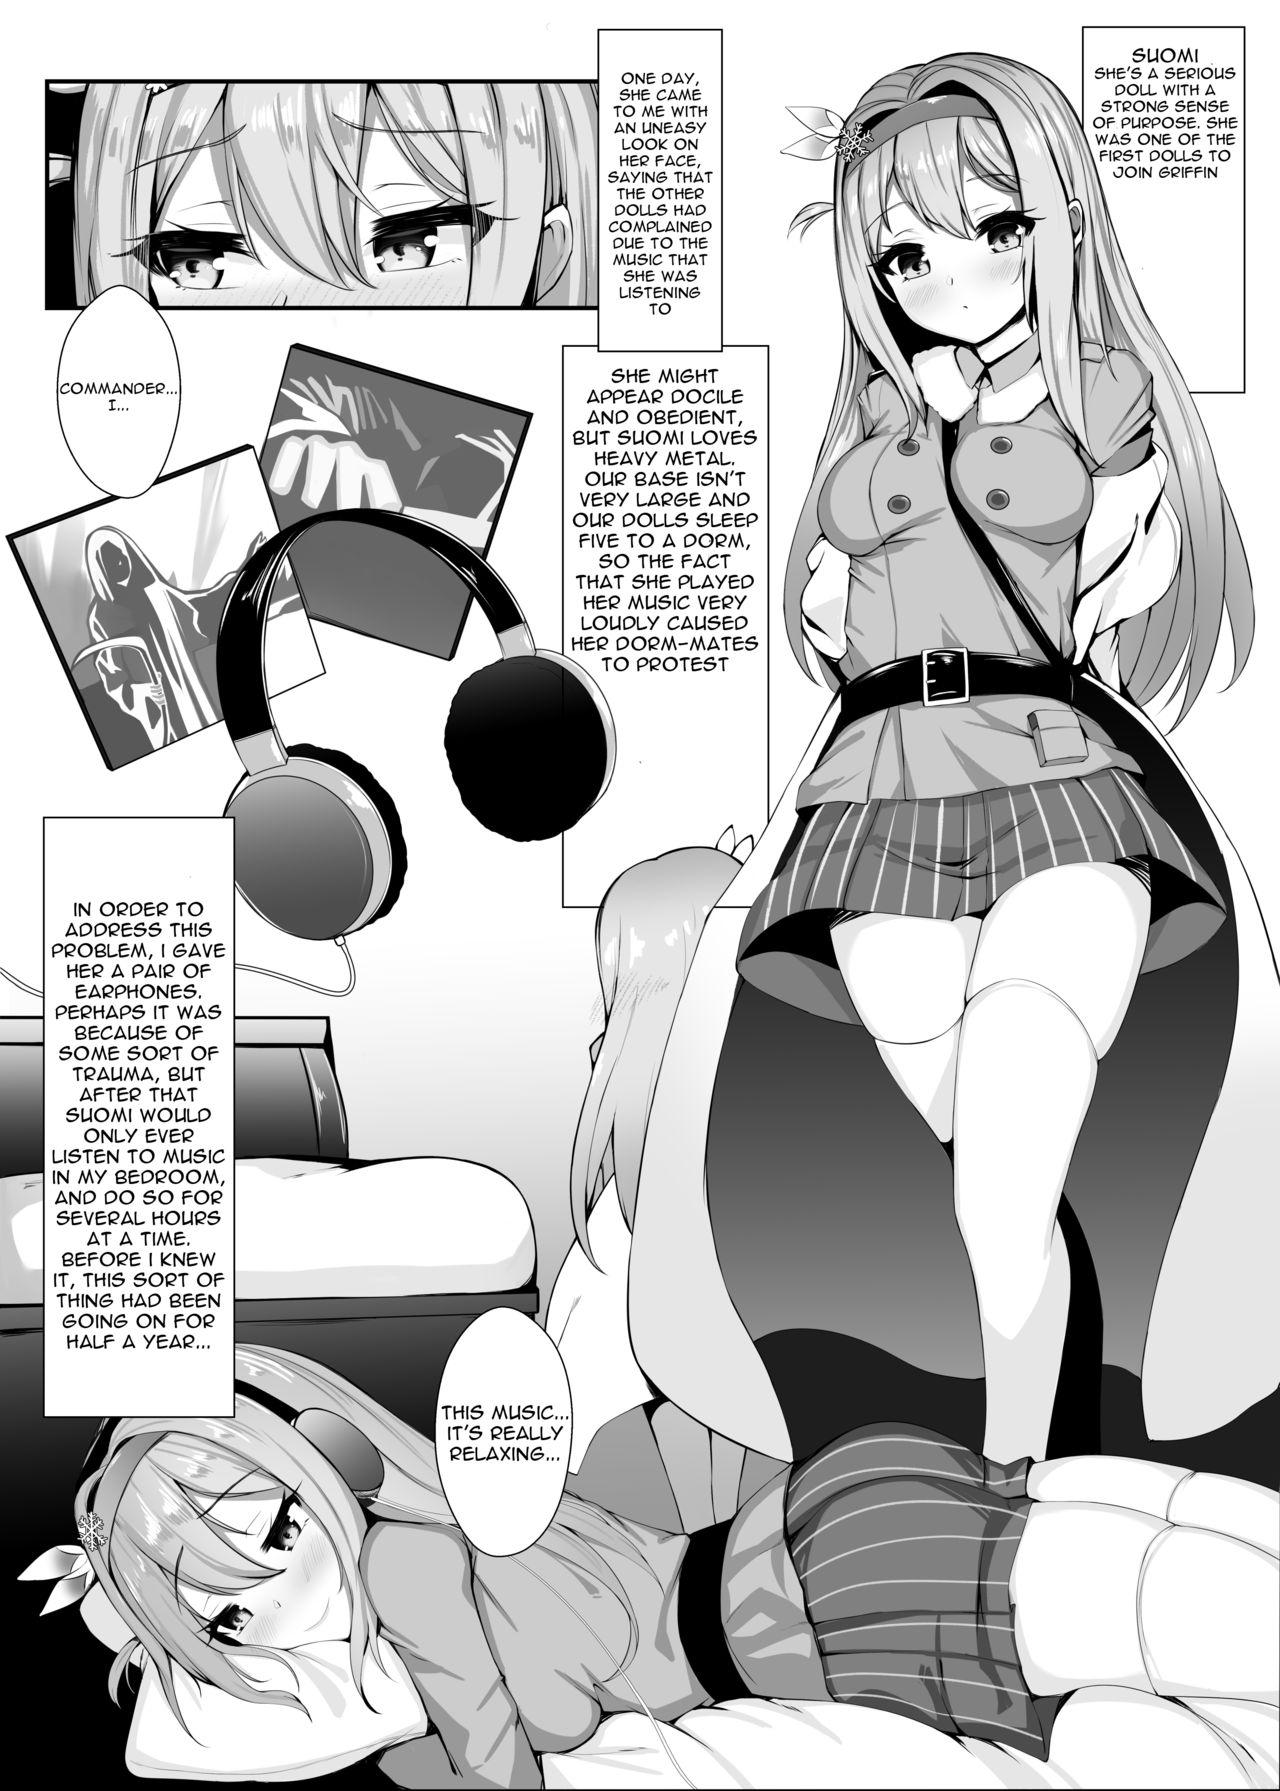 Comedor Suomi - Mission of Love - Girls frontline Exotic - Page 4